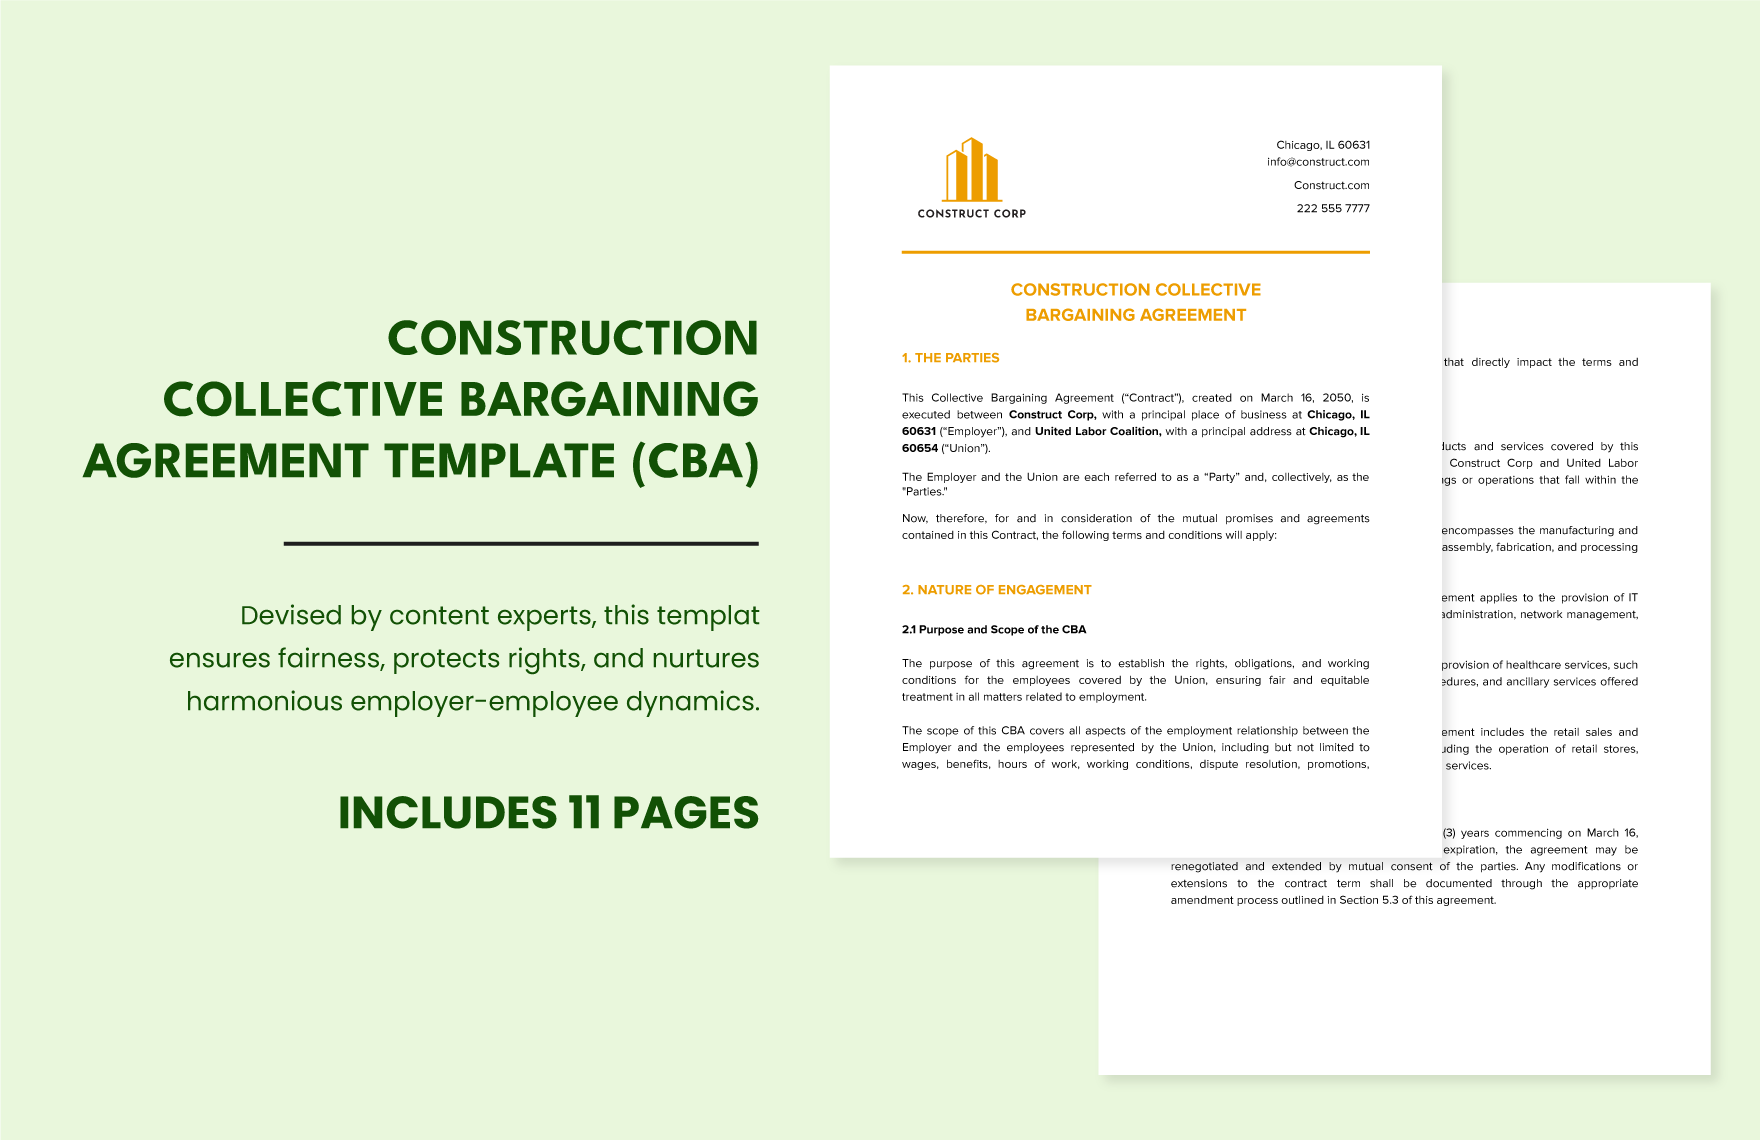 Construction Collective Bargaining Agreement Template (CBA)